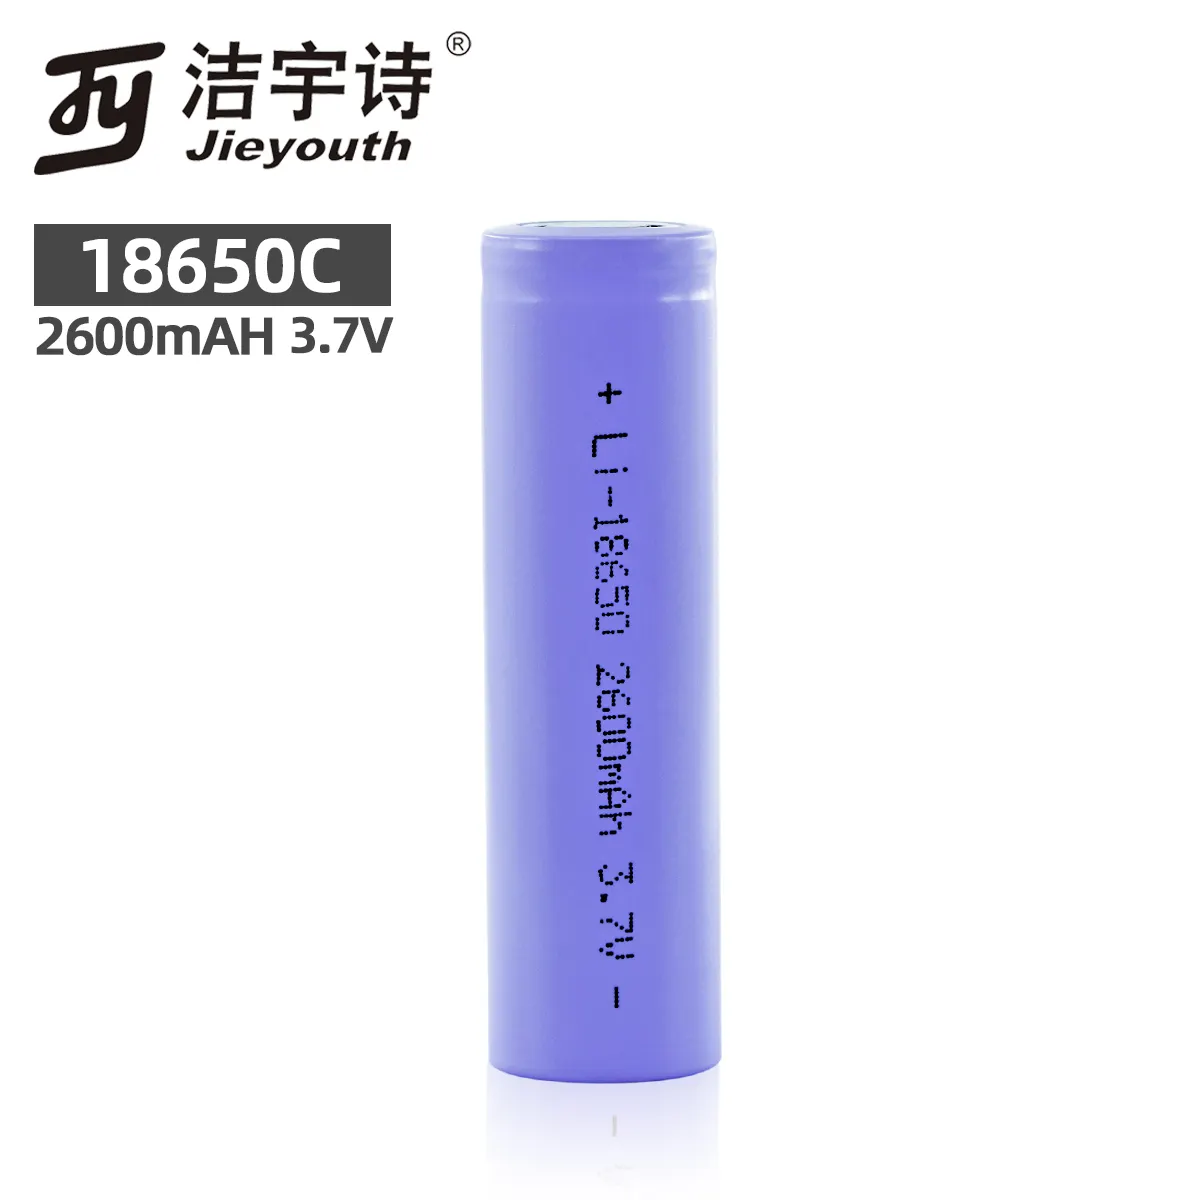 Best selling 18650 3.7v 2600mAh Lithium-ion Battery for Consumer Electronics/Electric shavers with 18650 batteries